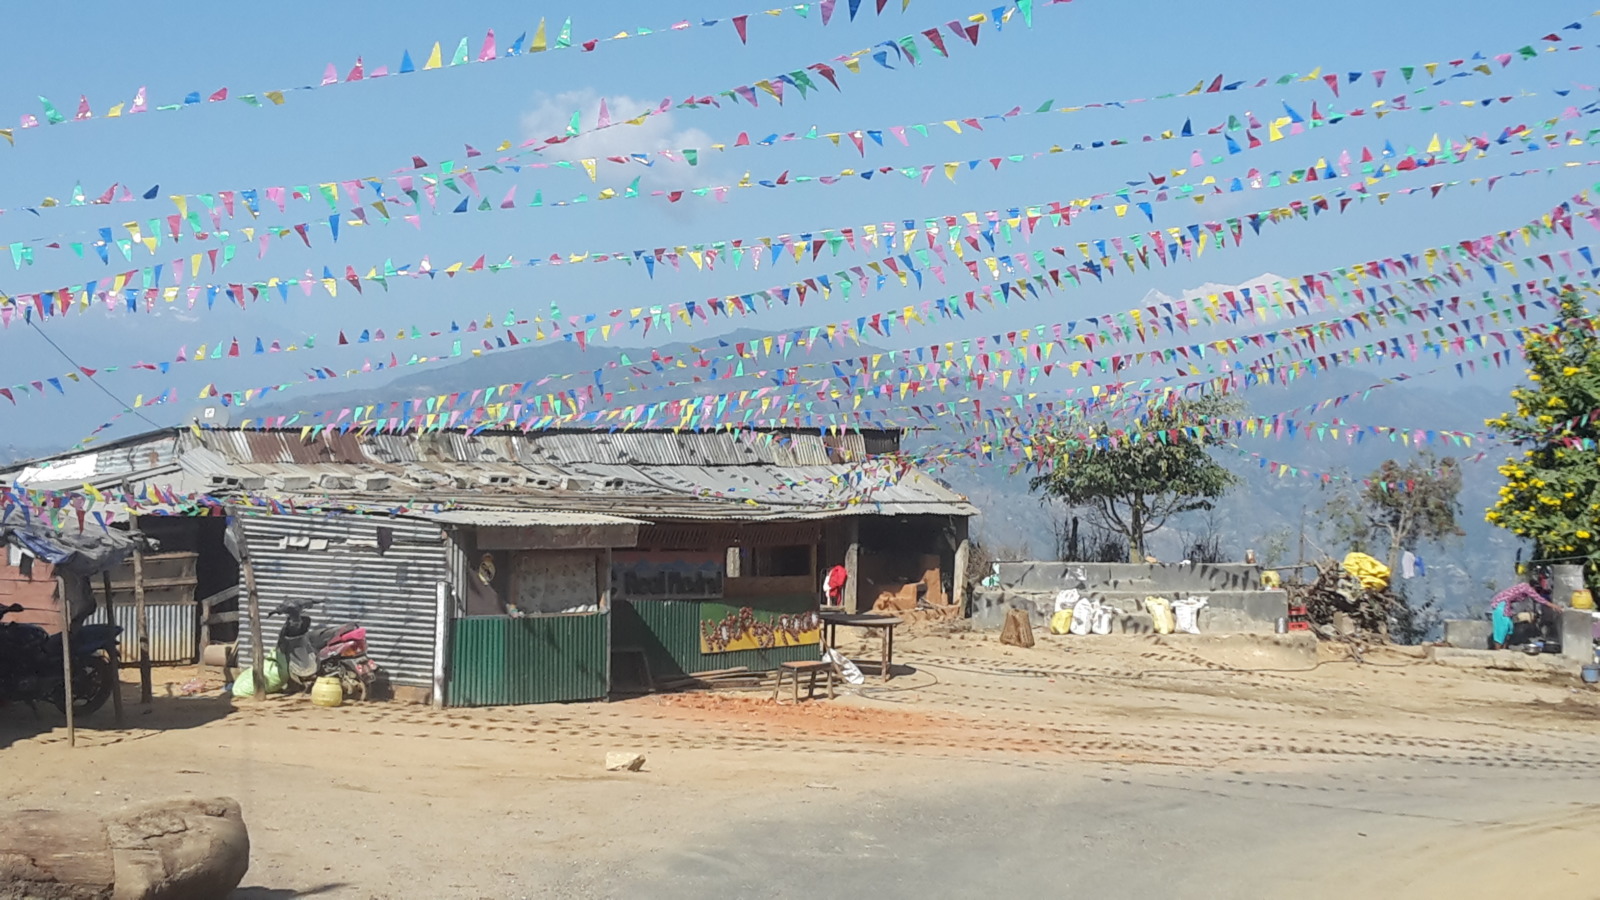 Flags at one of the villages on the Tribhuvan Highway.